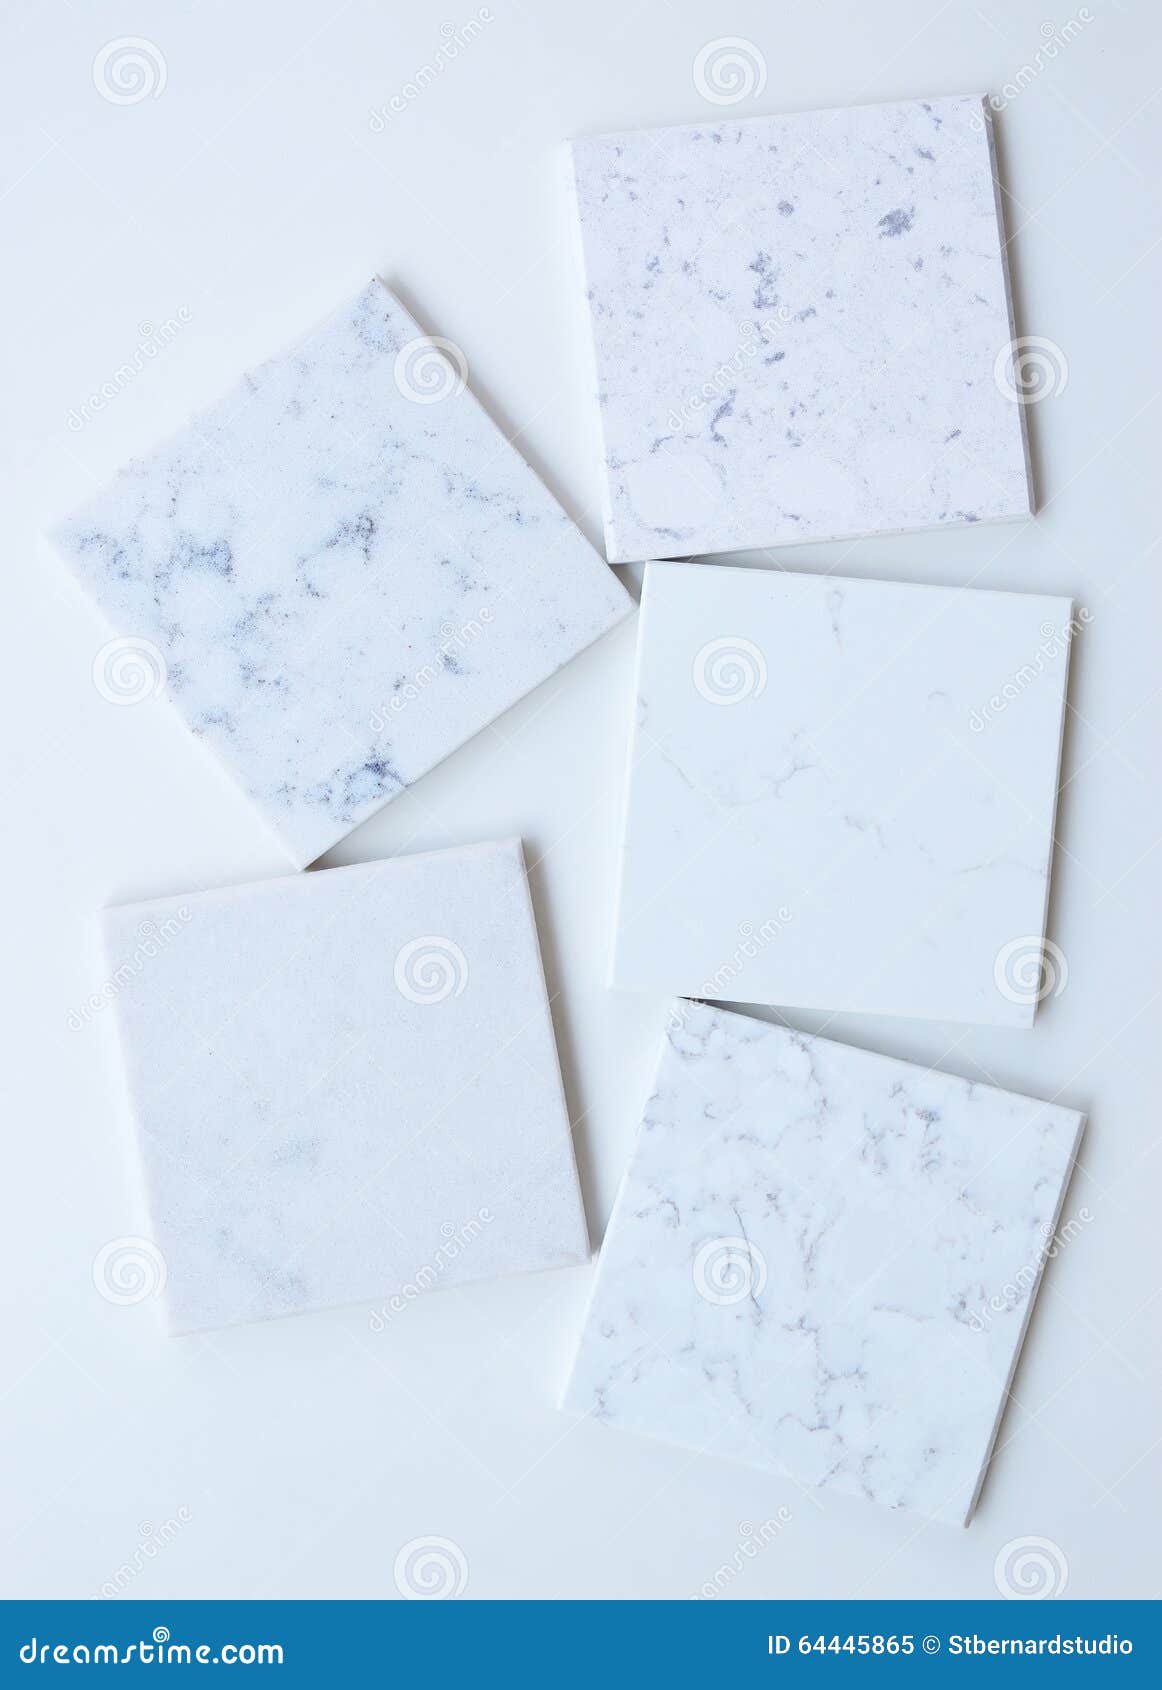 five different stone samples mainly white based with marble like grains and veins